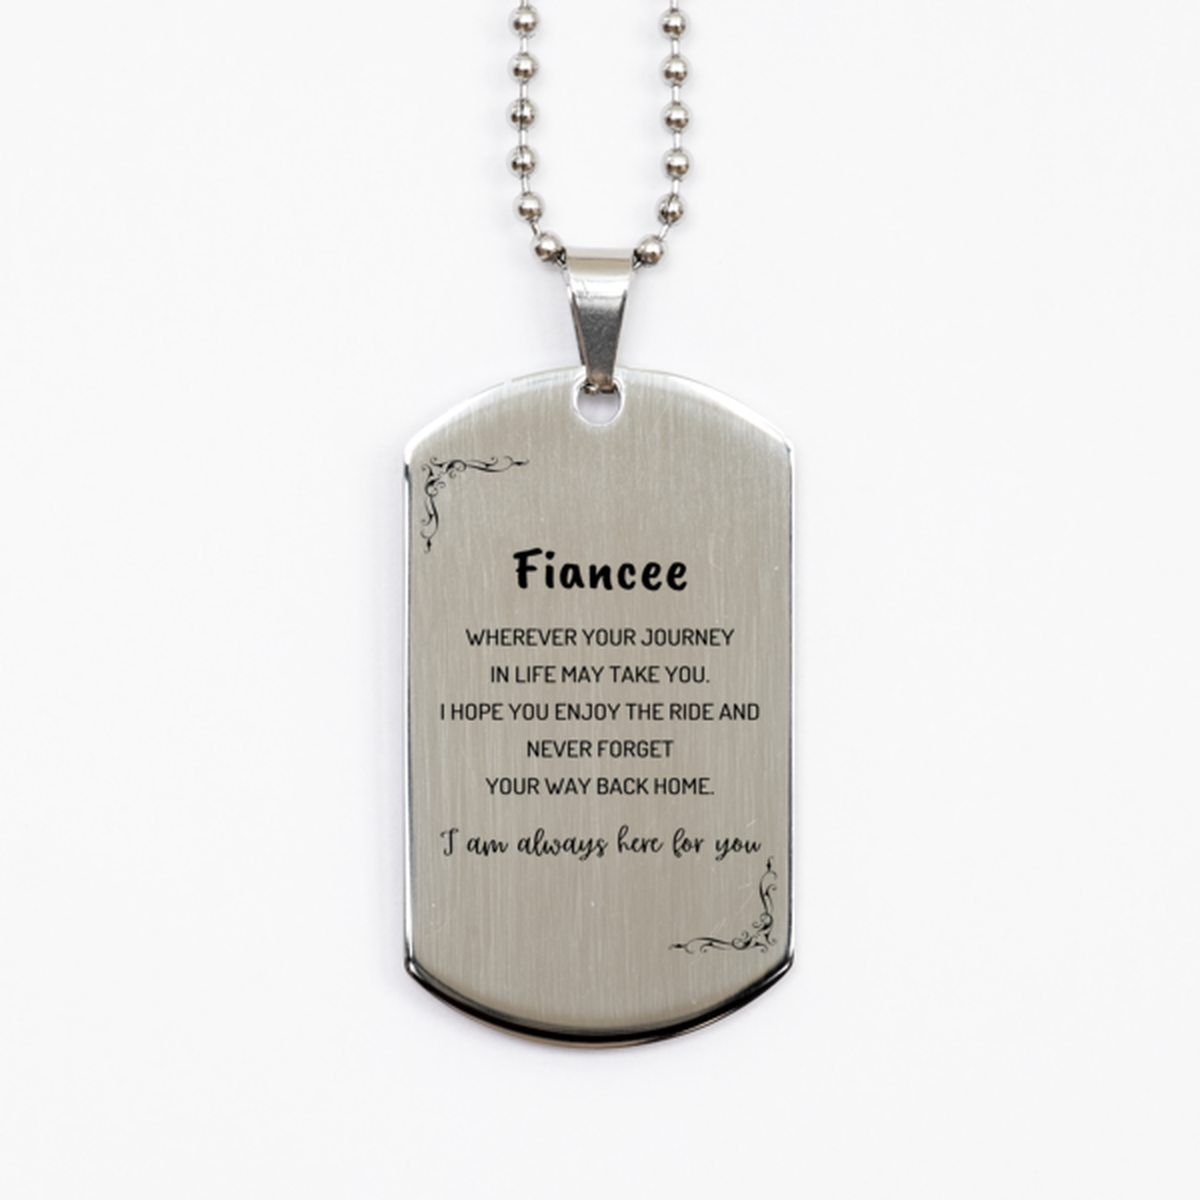 Fiancee wherever your journey in life may take you, I am always here for you Fiancee Silver Dog Tag, Awesome Christmas Gifts For Fiancee, Fiancee Birthday Gifts for Men Women Family Loved One